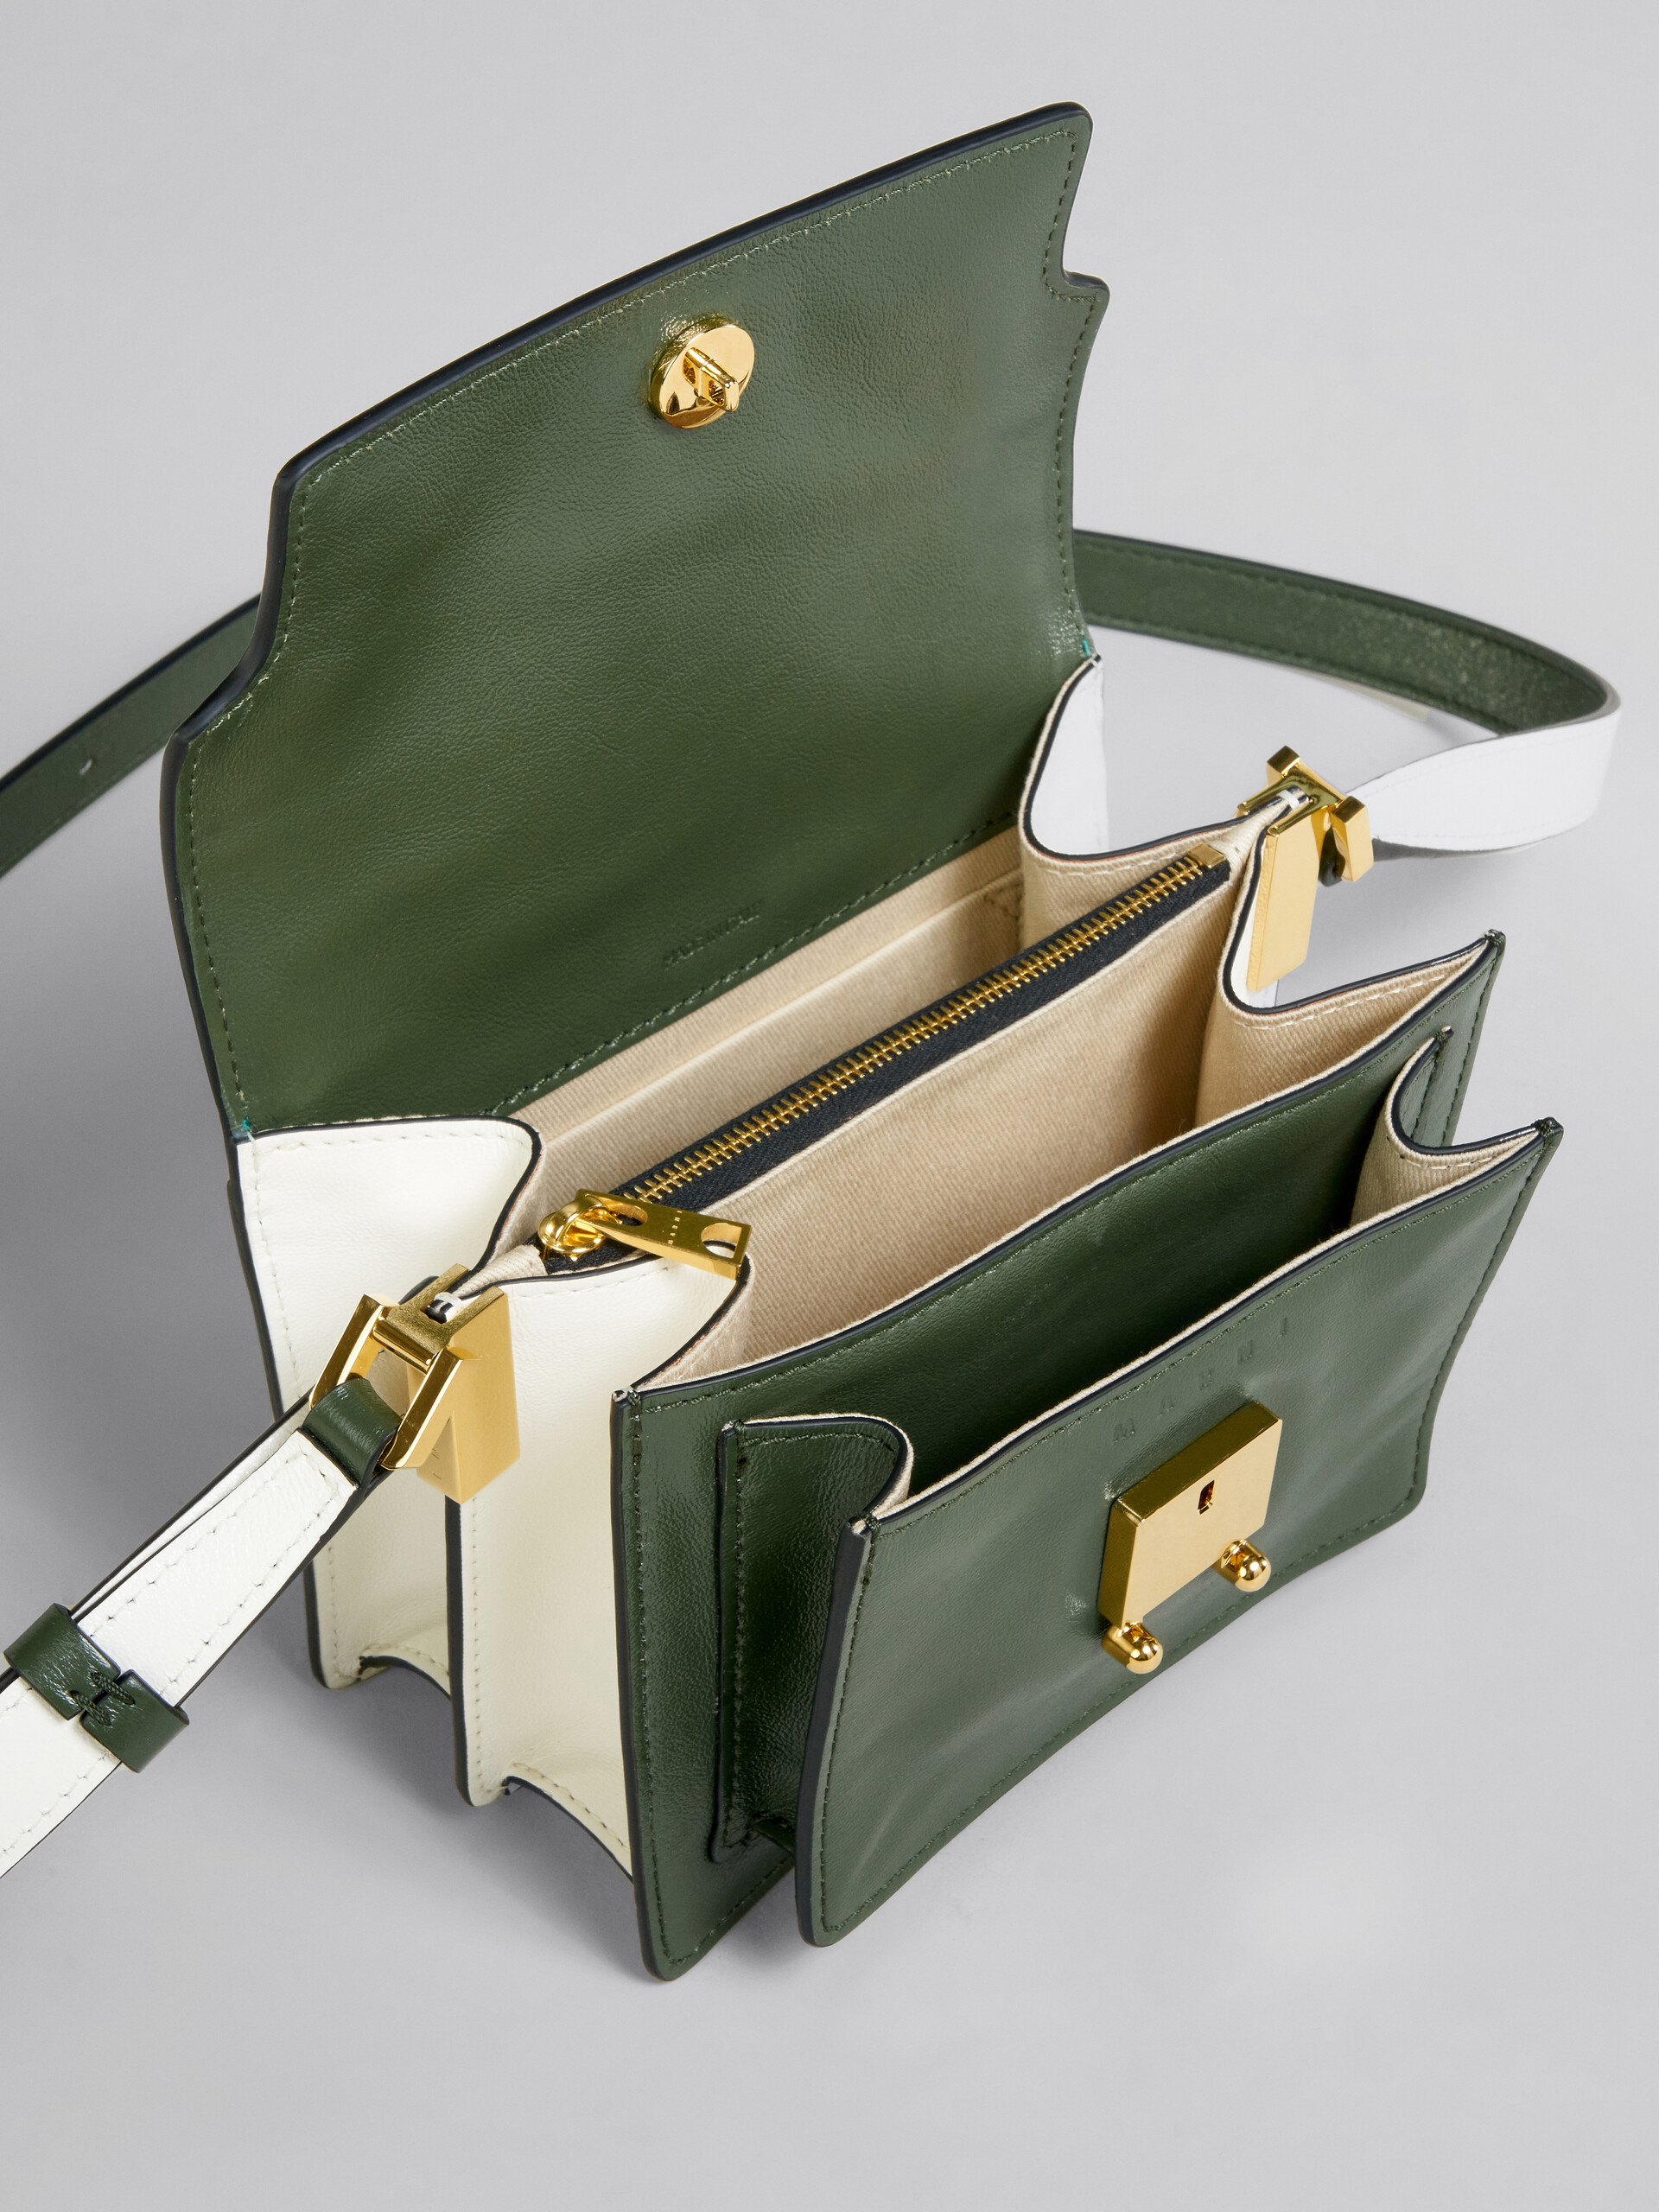 Trunk Soft Mini Bag in green and white leather - Shoulder Bags - Image 4